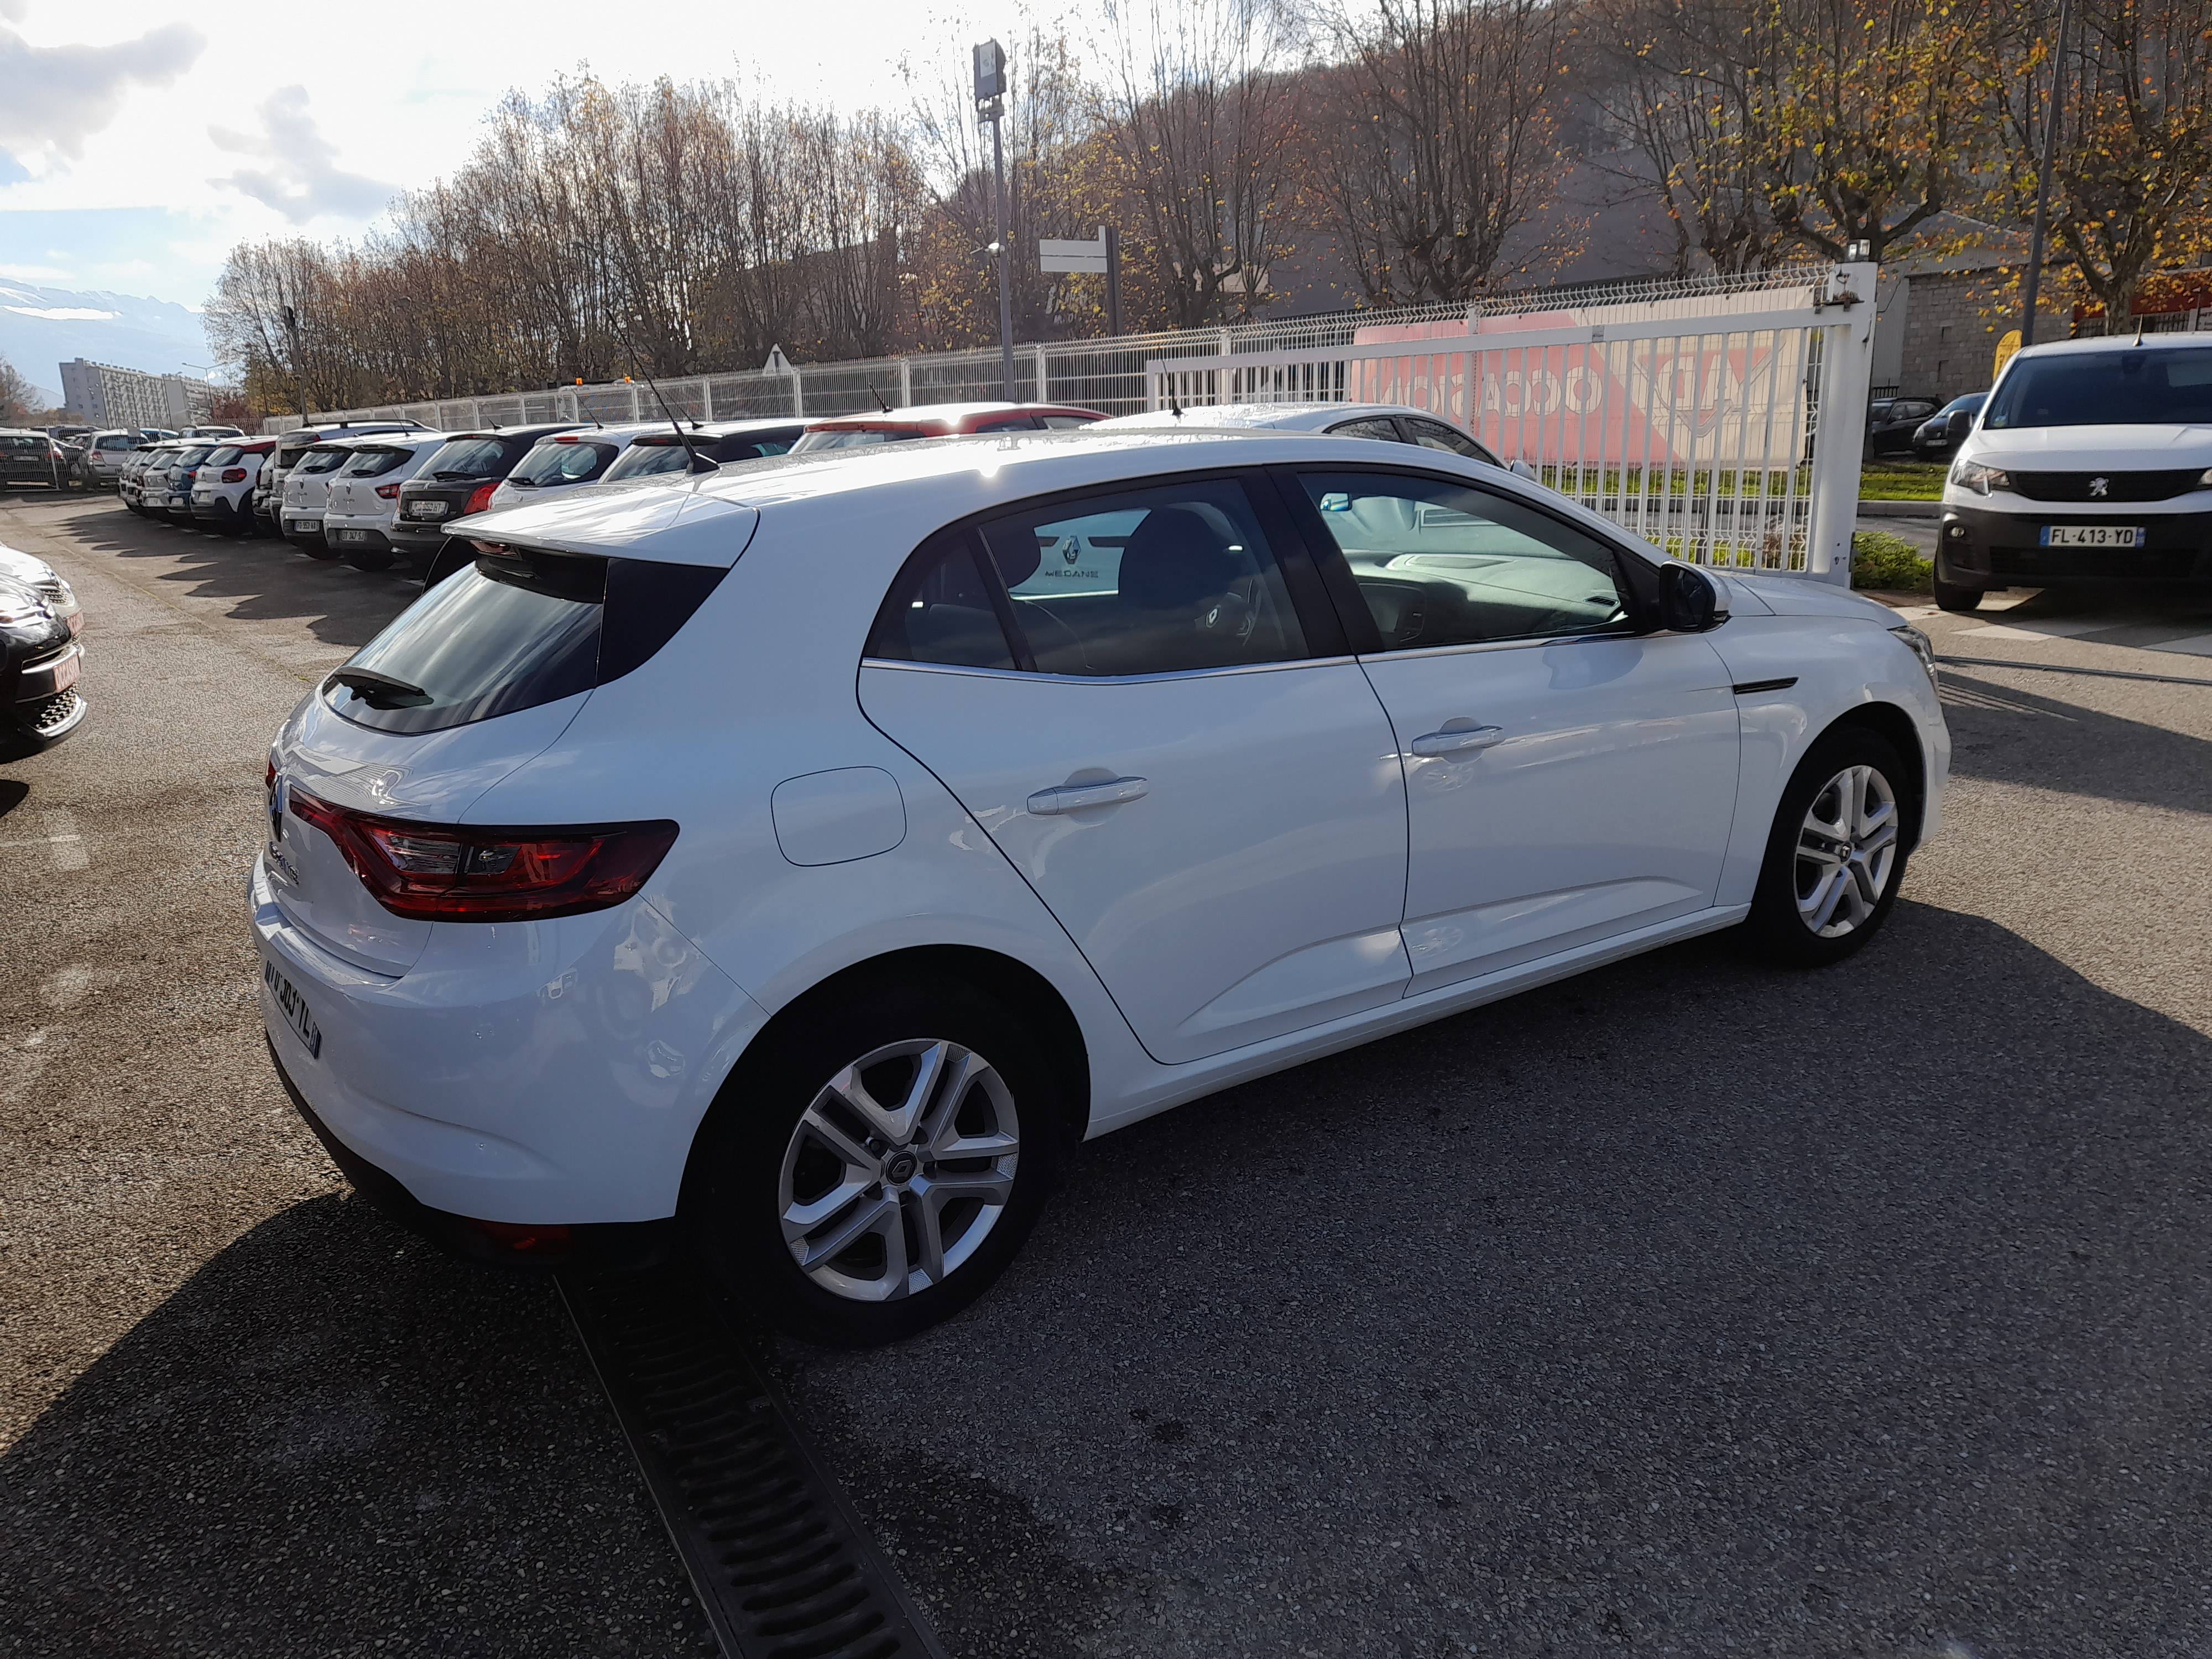 Renault Mégane  IV  1.5 dCi 110ch energy Business occasion - Photo 2